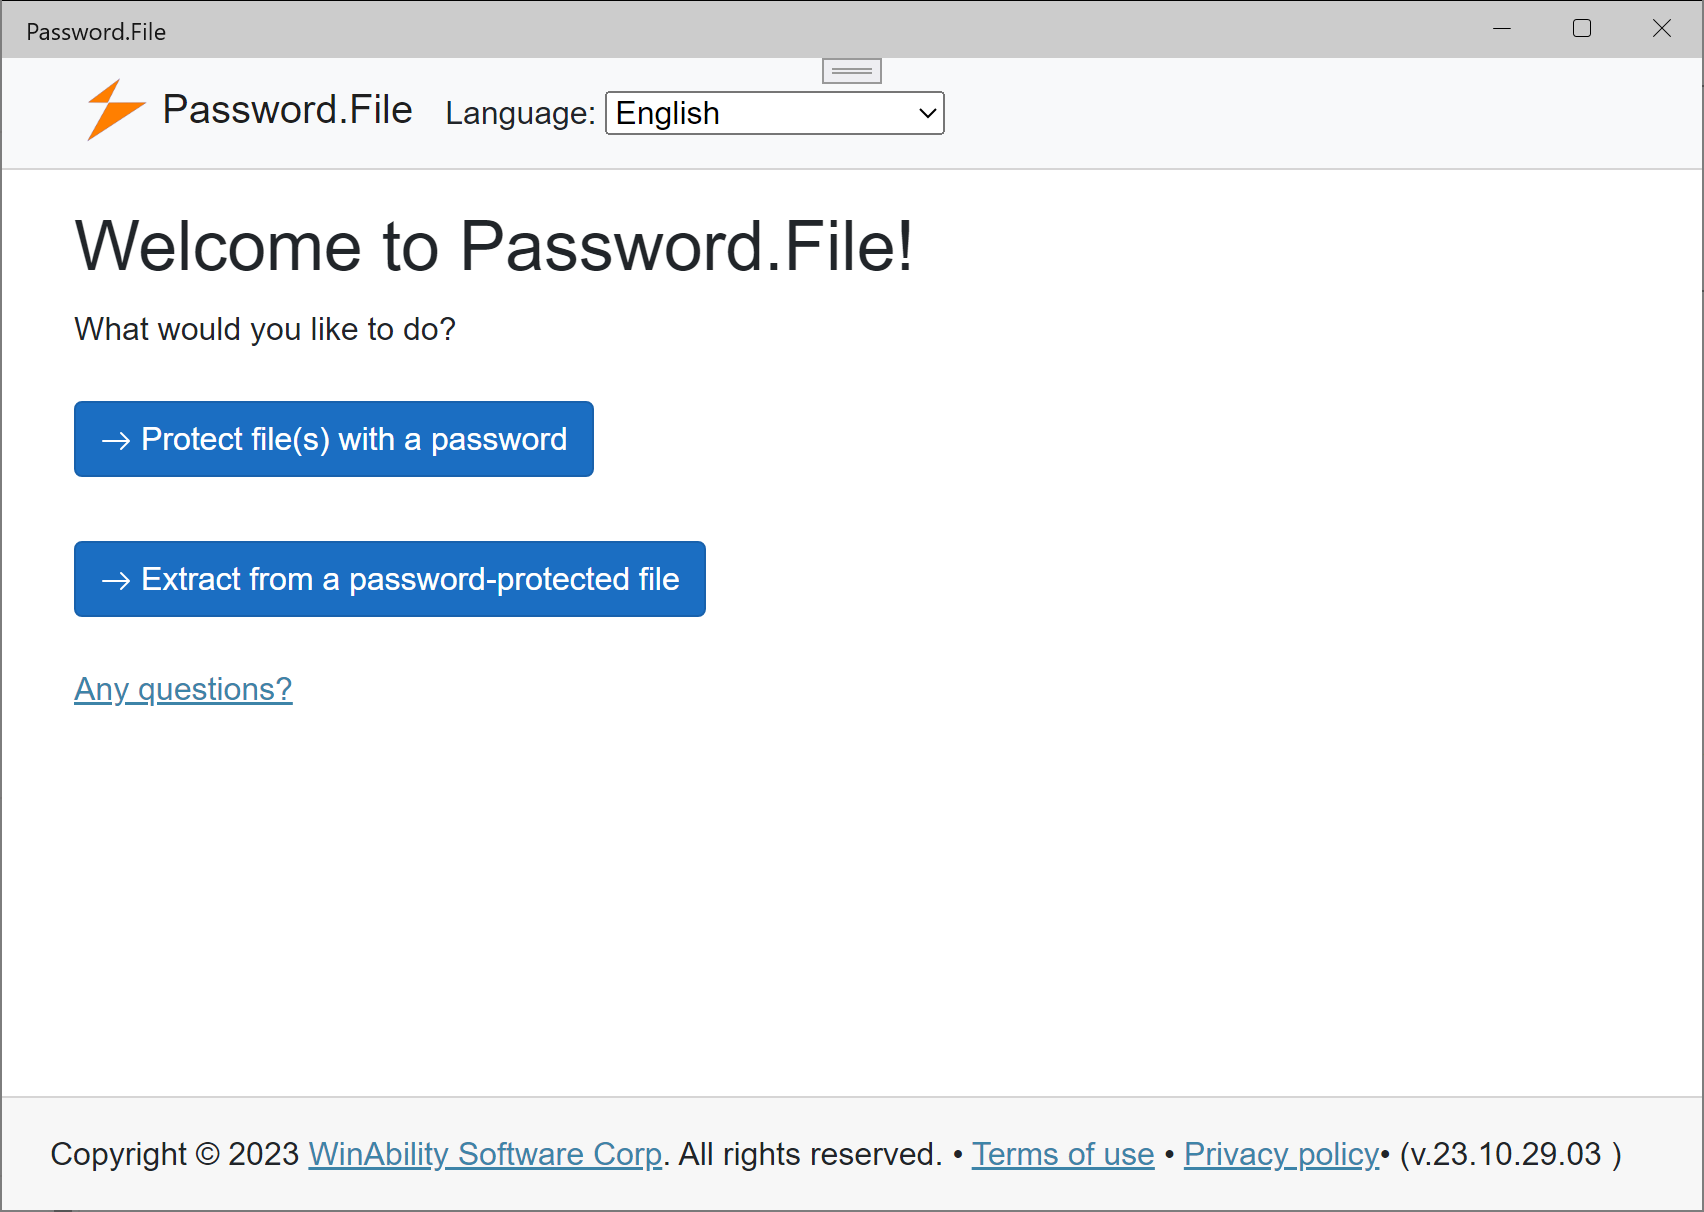 Password.File welcome screen